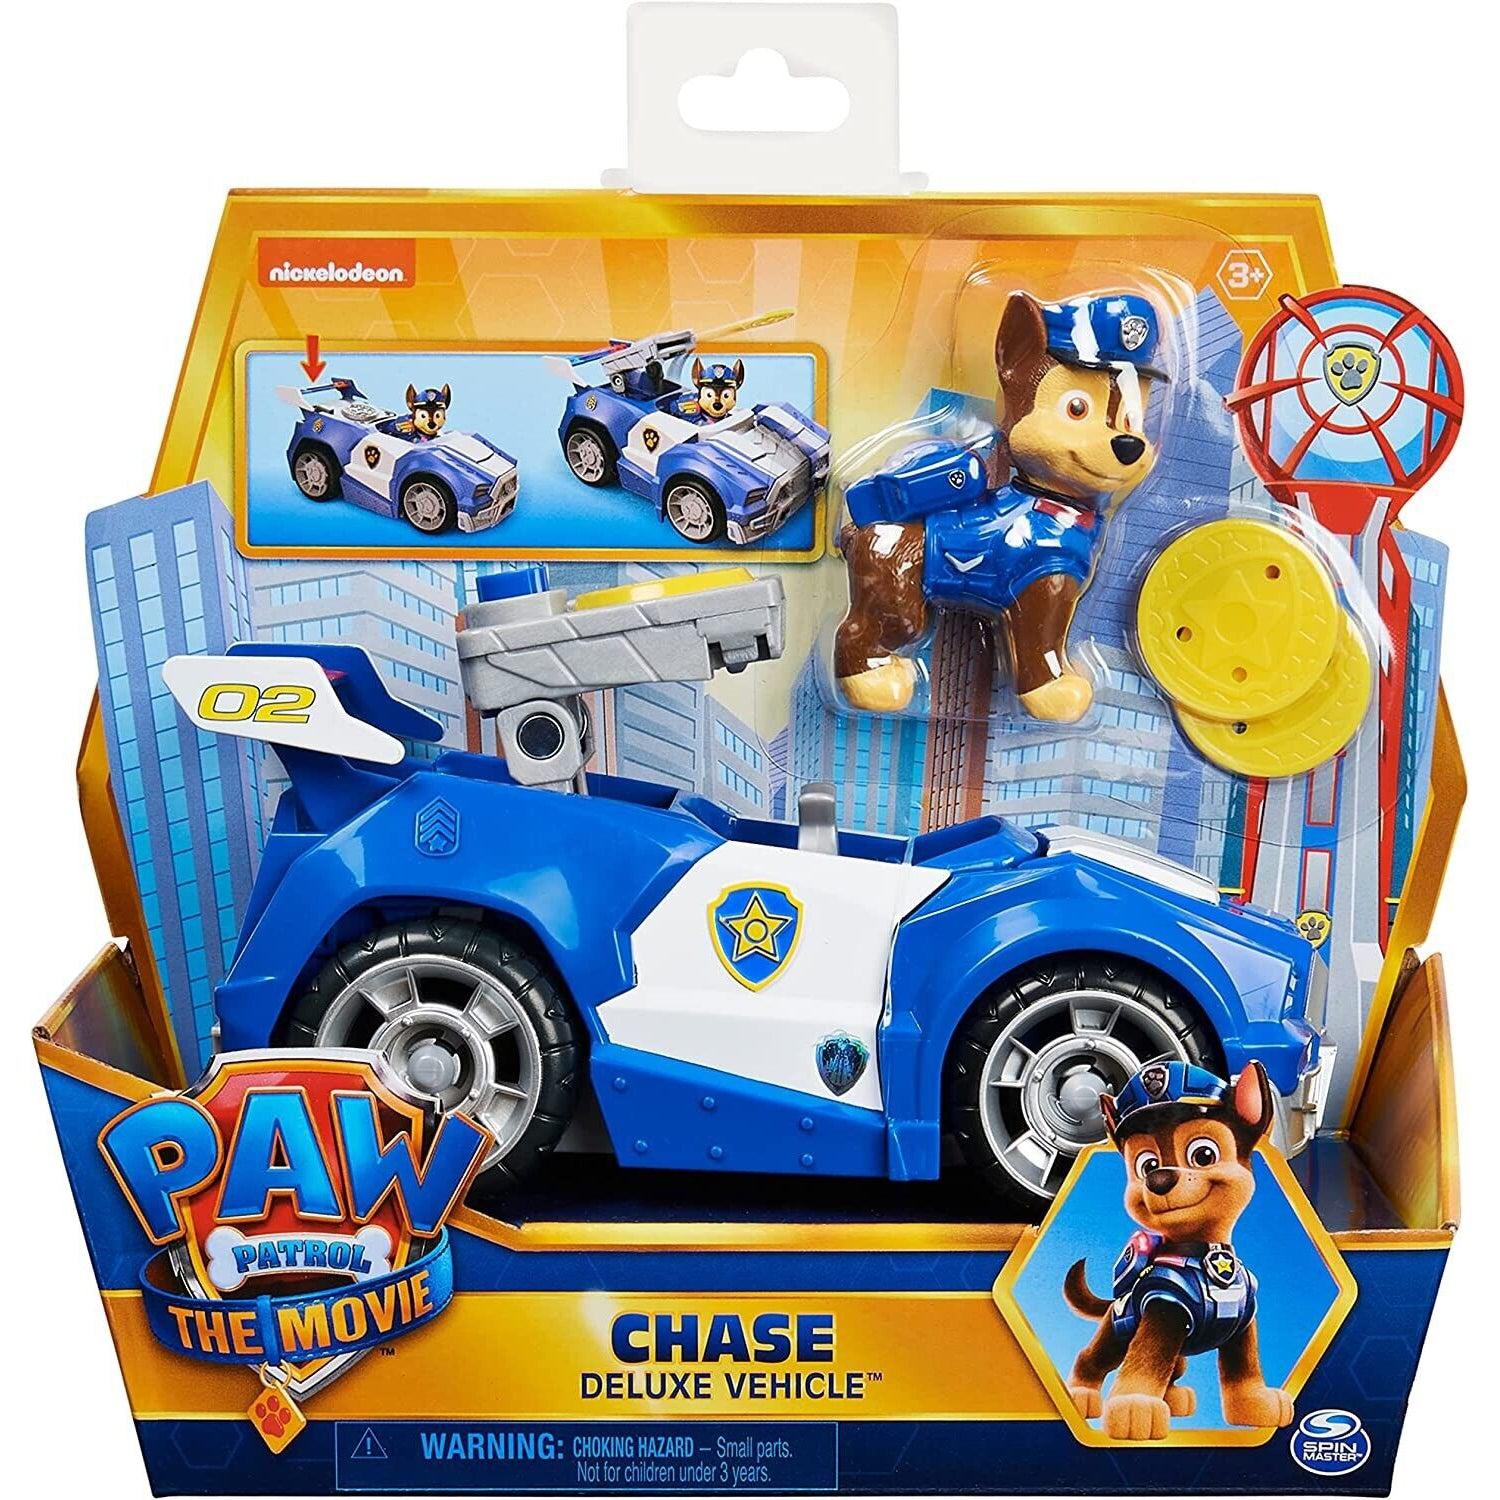 PAW Patrol: The Movie - Chase Deluxe Vehicle